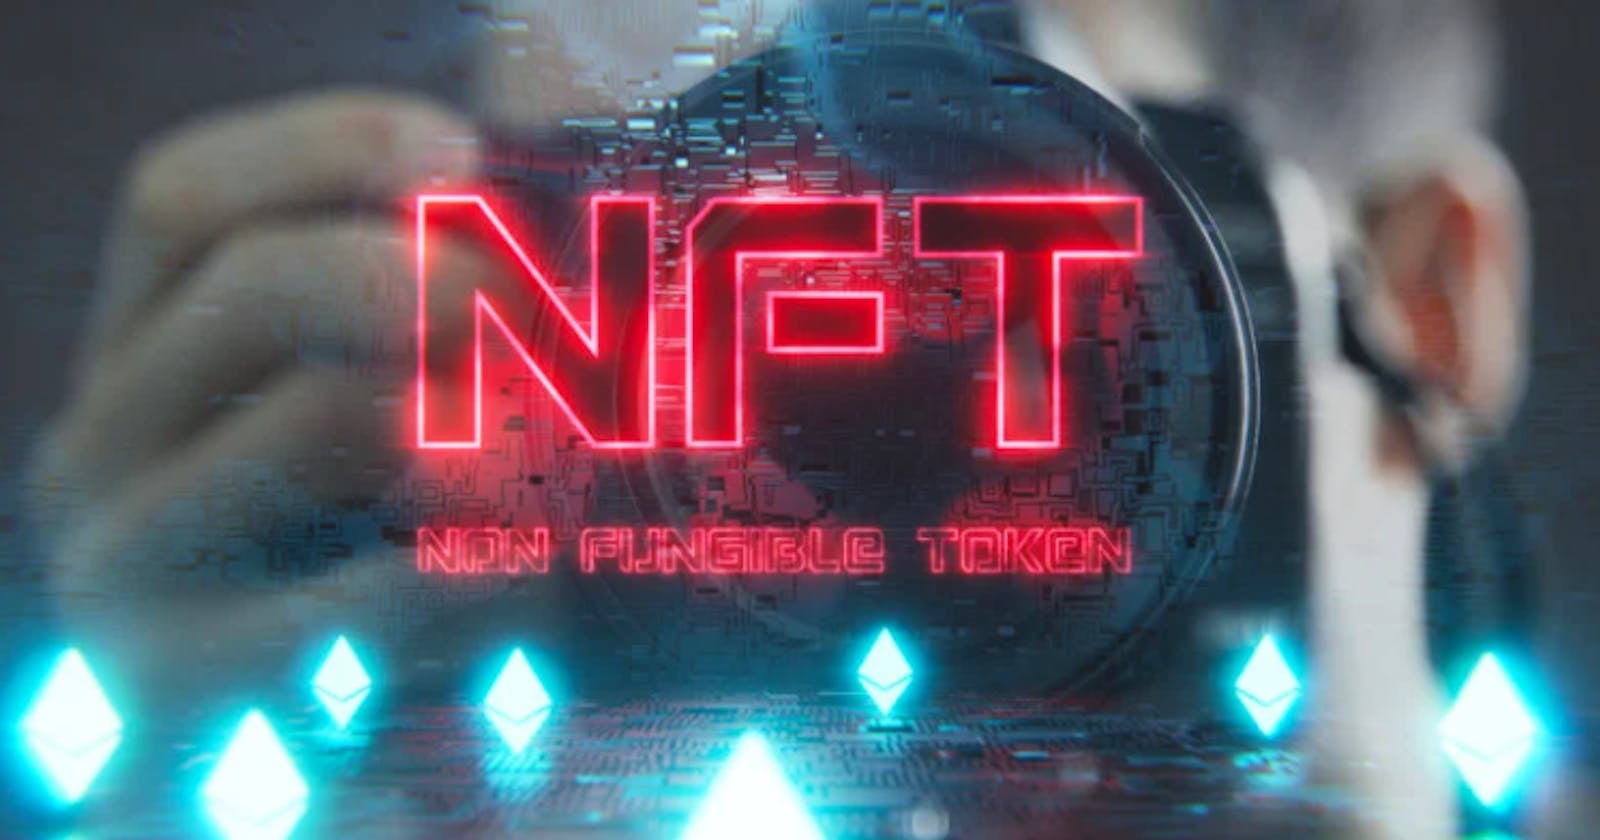 Instagram is the first social media to launch NFT